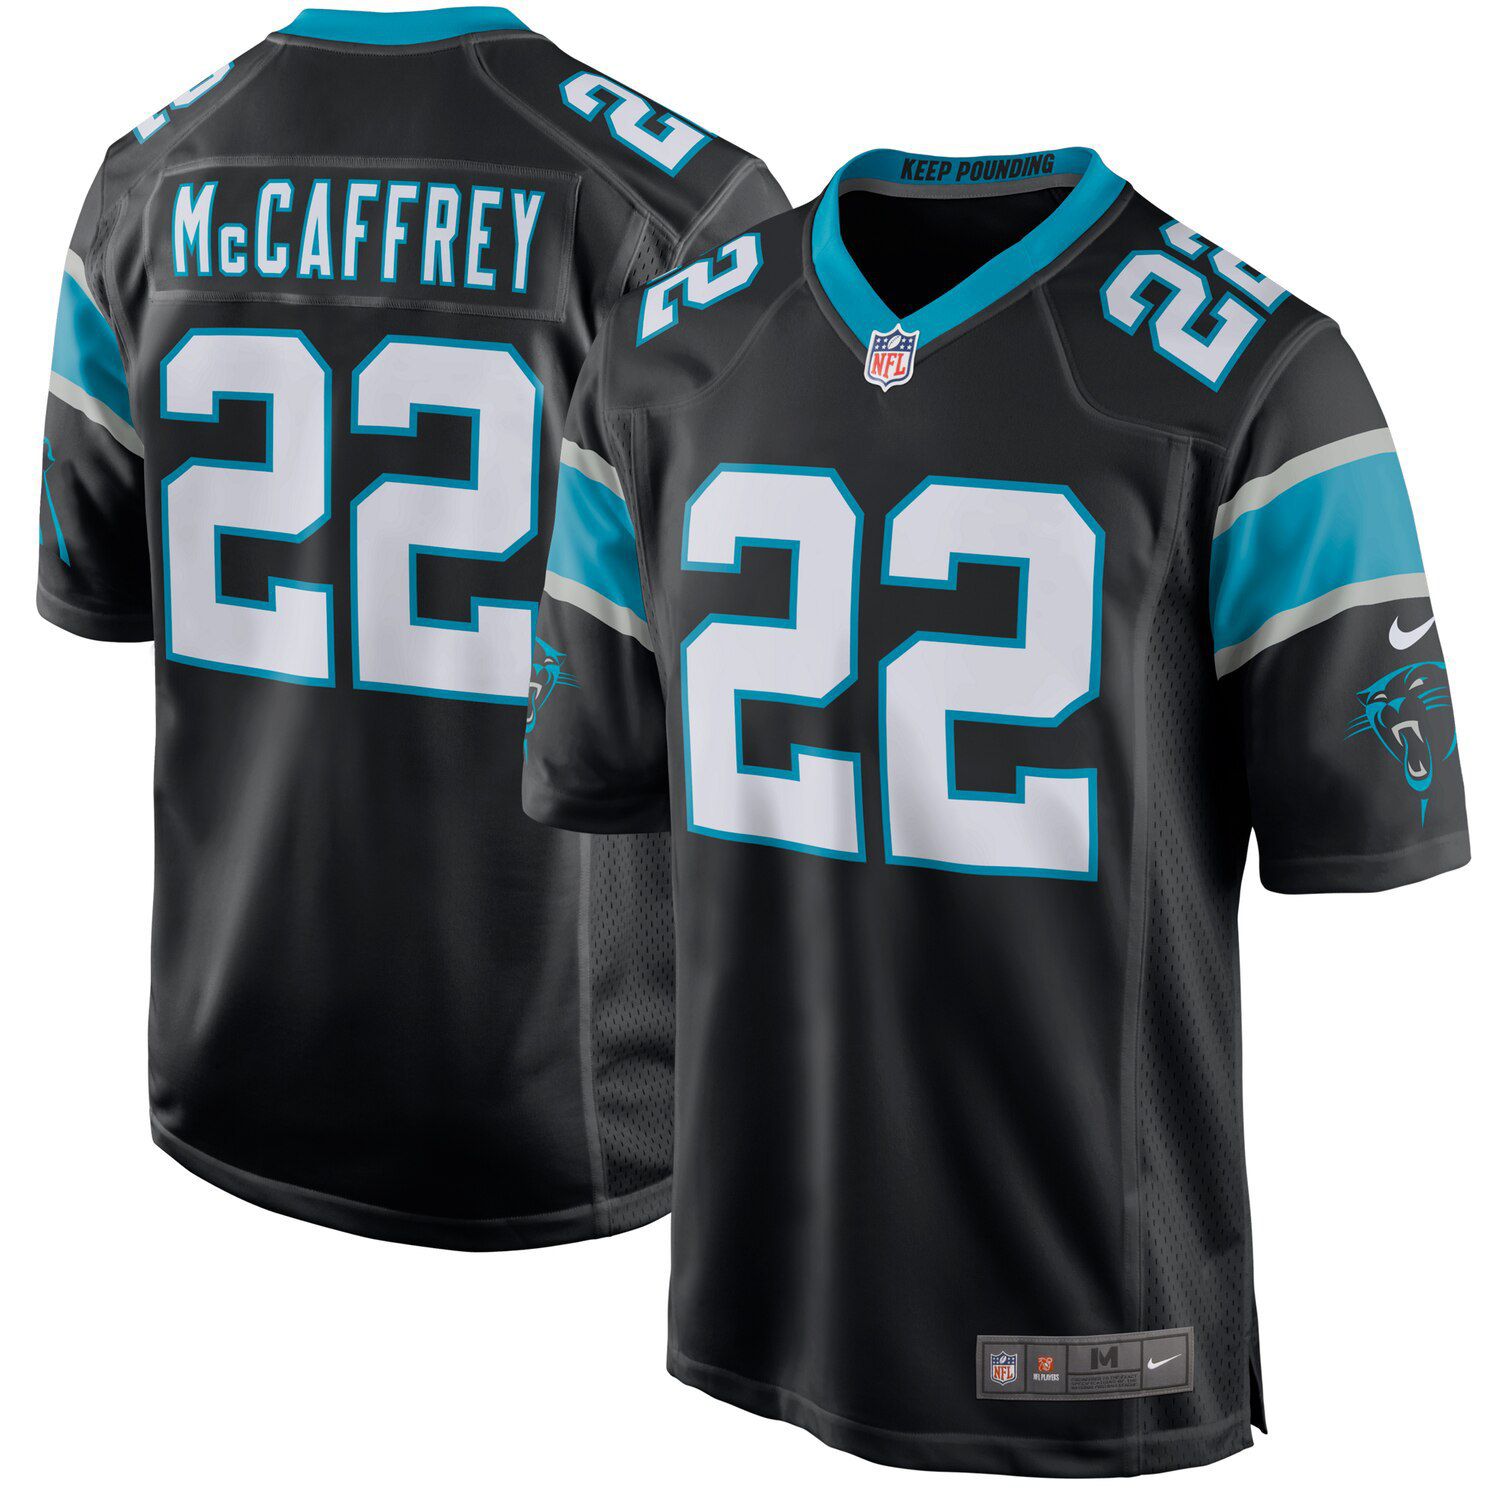 panthers jersey youth xl